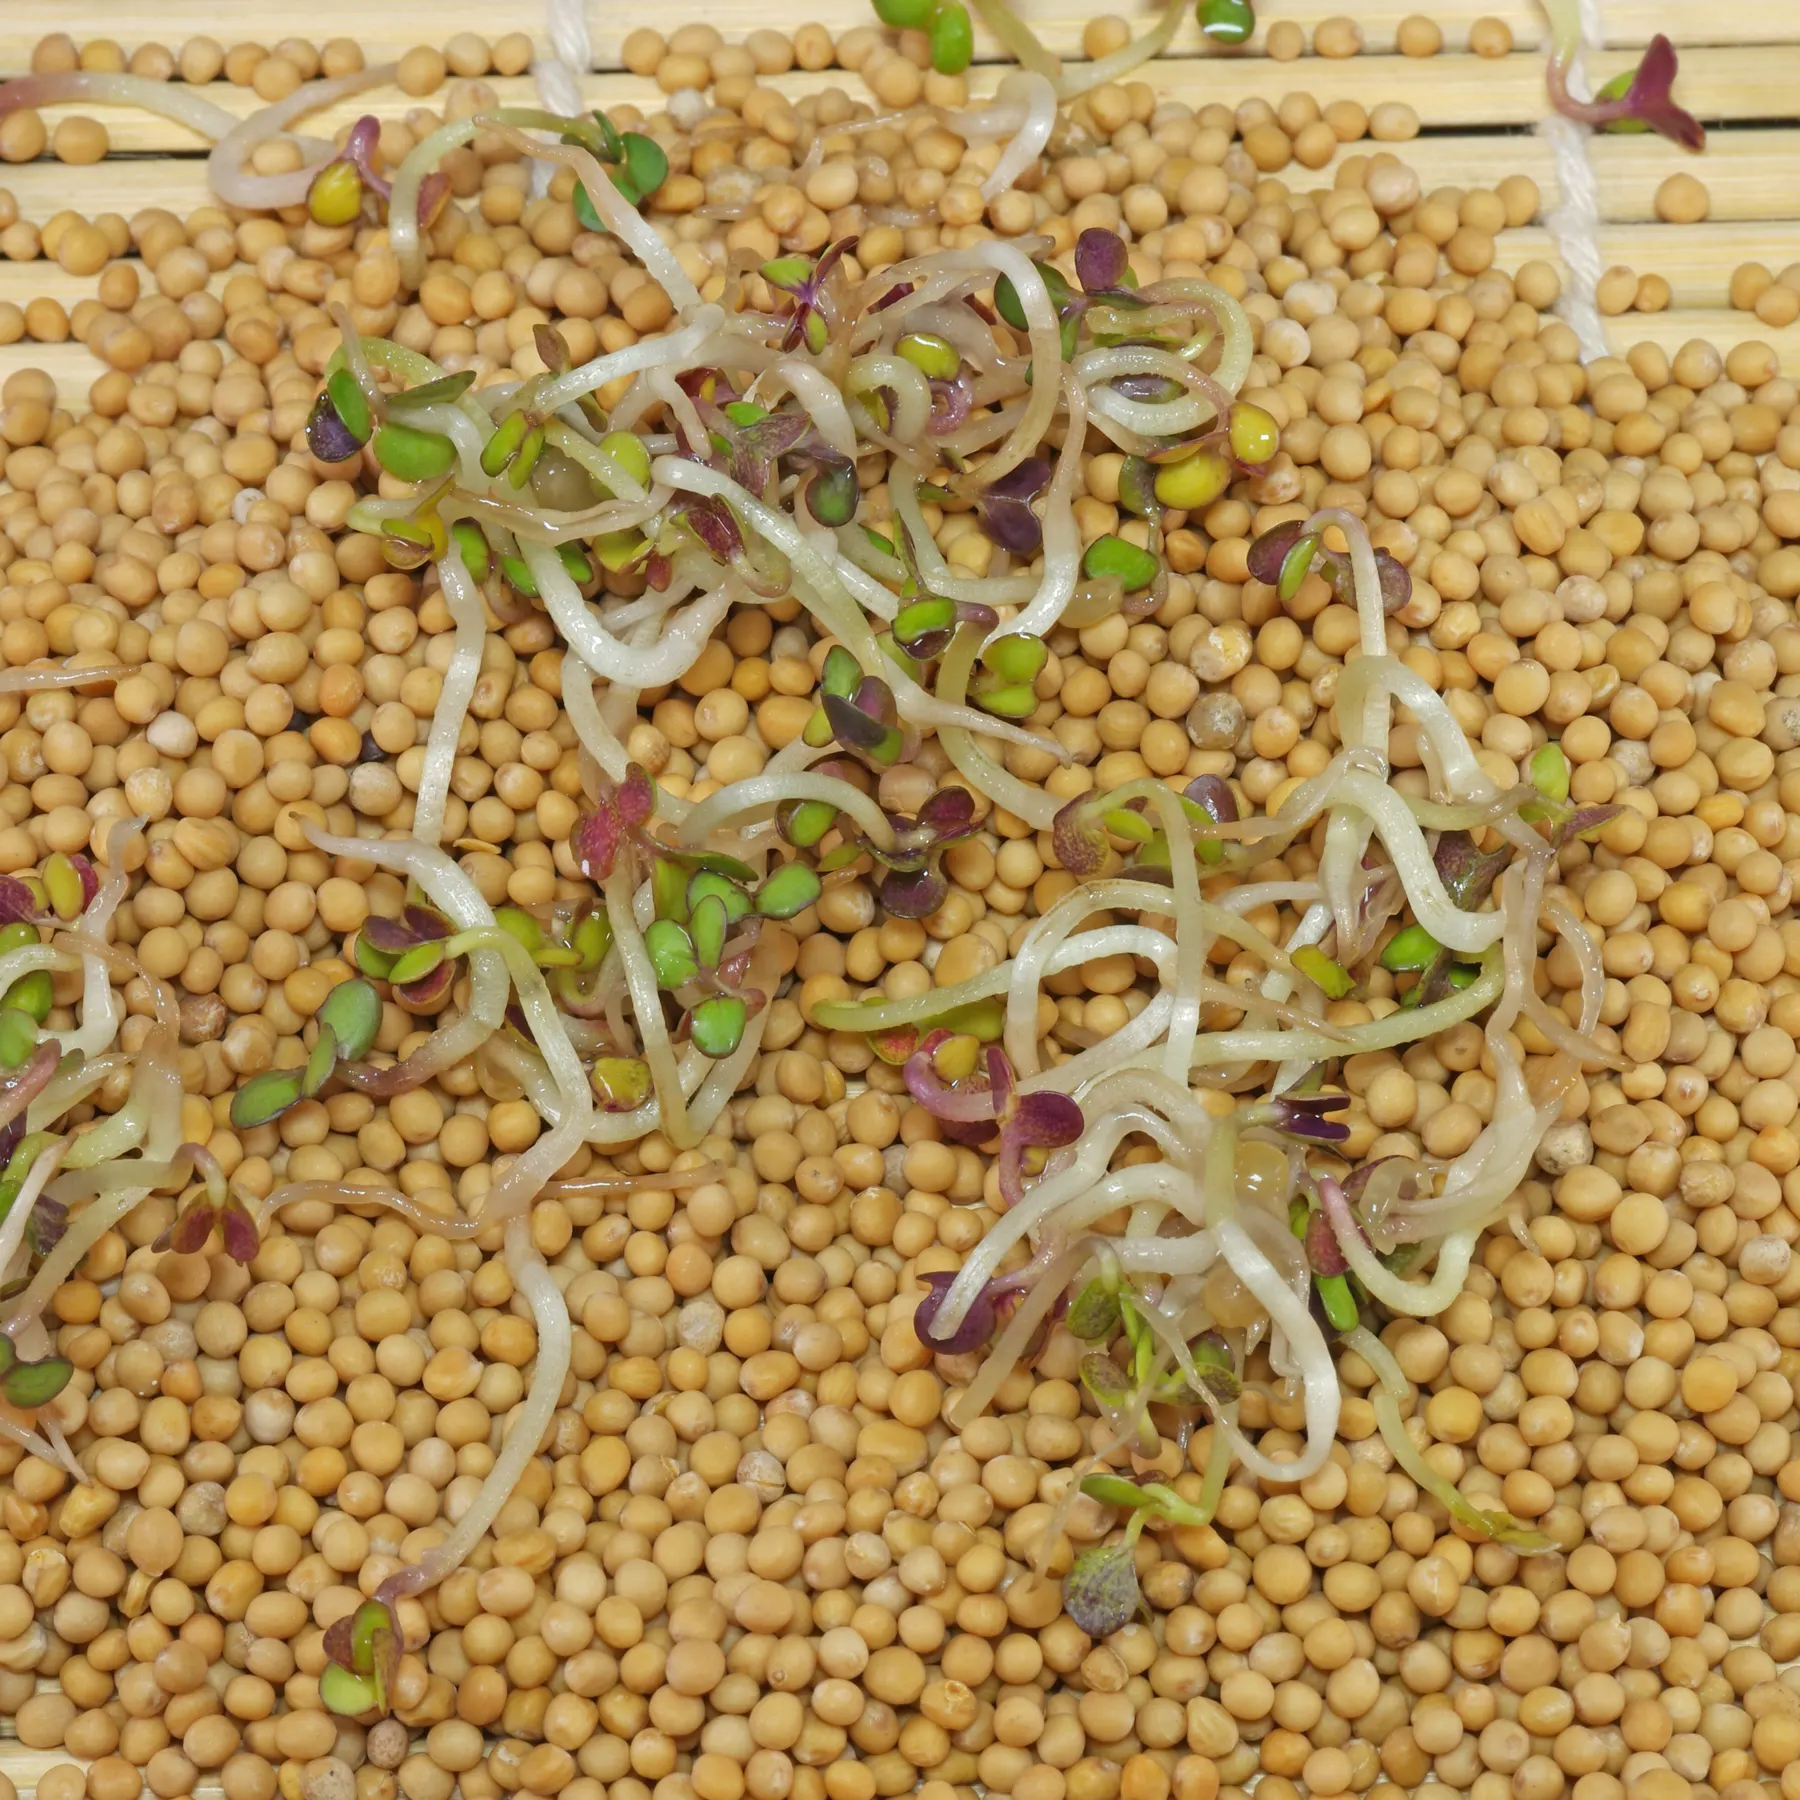 Mustard sprouts from white mustard seeds